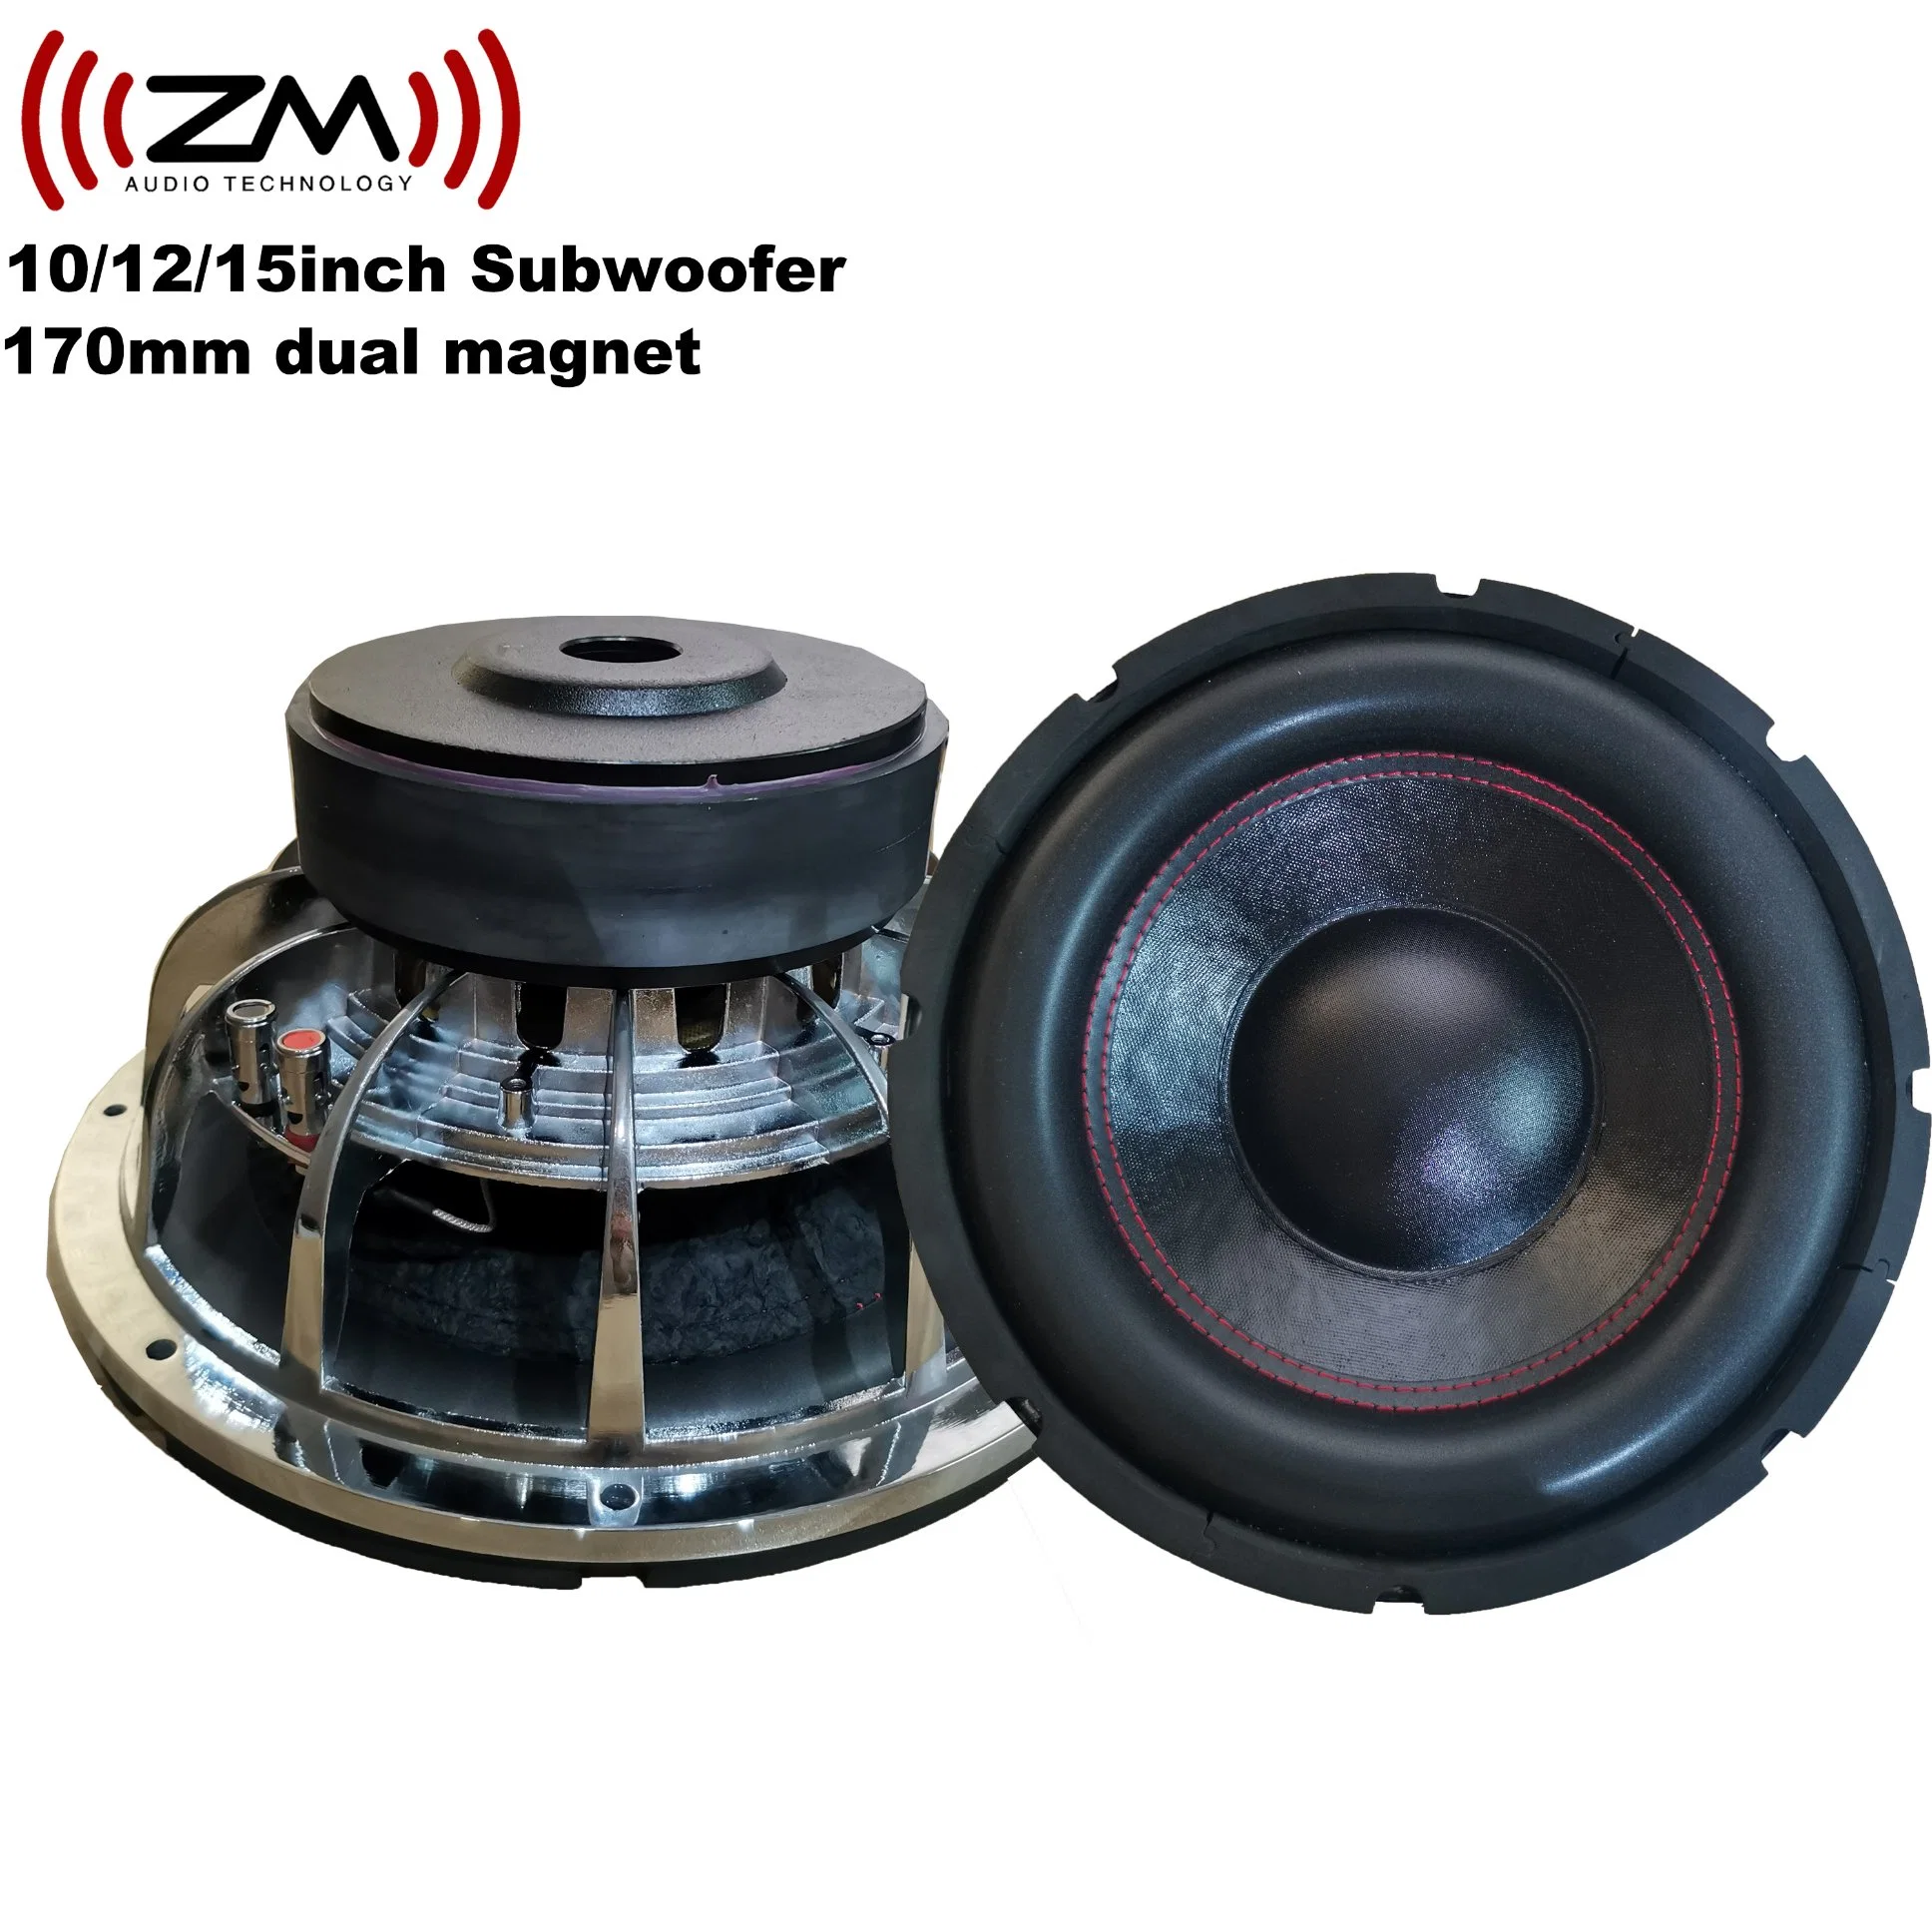 Subwoofer Plate Amplifier Heavy Bass Speakers 12 Inch Subwoofer Sound Audio Aluminum Speakers